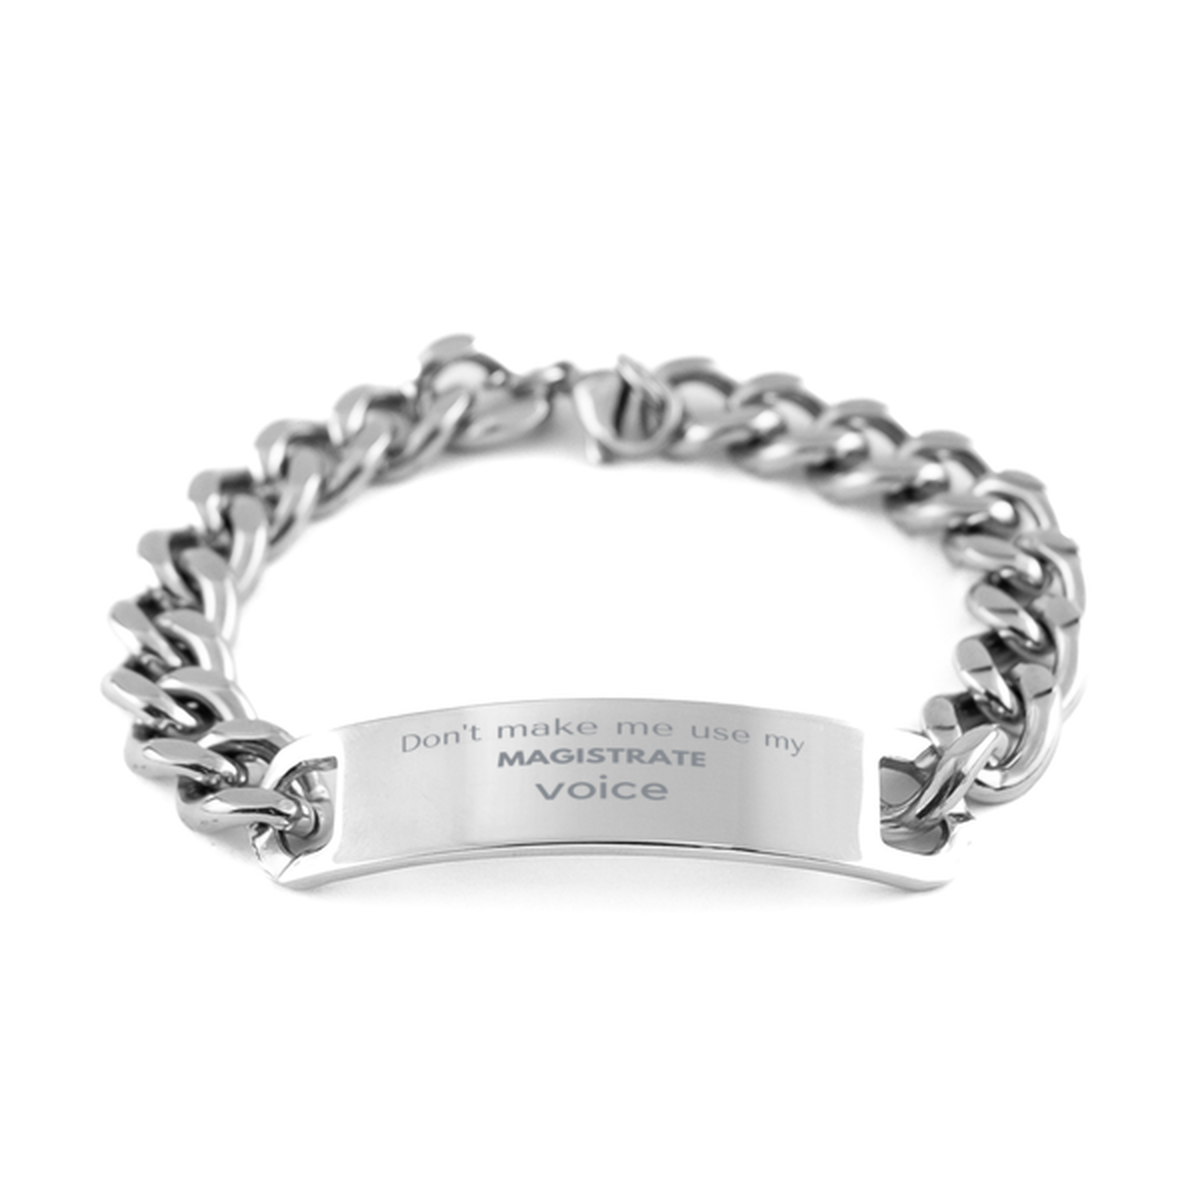 Don't make me use my Magistrate voice, Sarcasm Magistrate Gifts, Christmas Magistrate Cuban Chain Stainless Steel Bracelet Birthday Unique Gifts For Magistrate Coworkers, Men, Women, Colleague, Friends